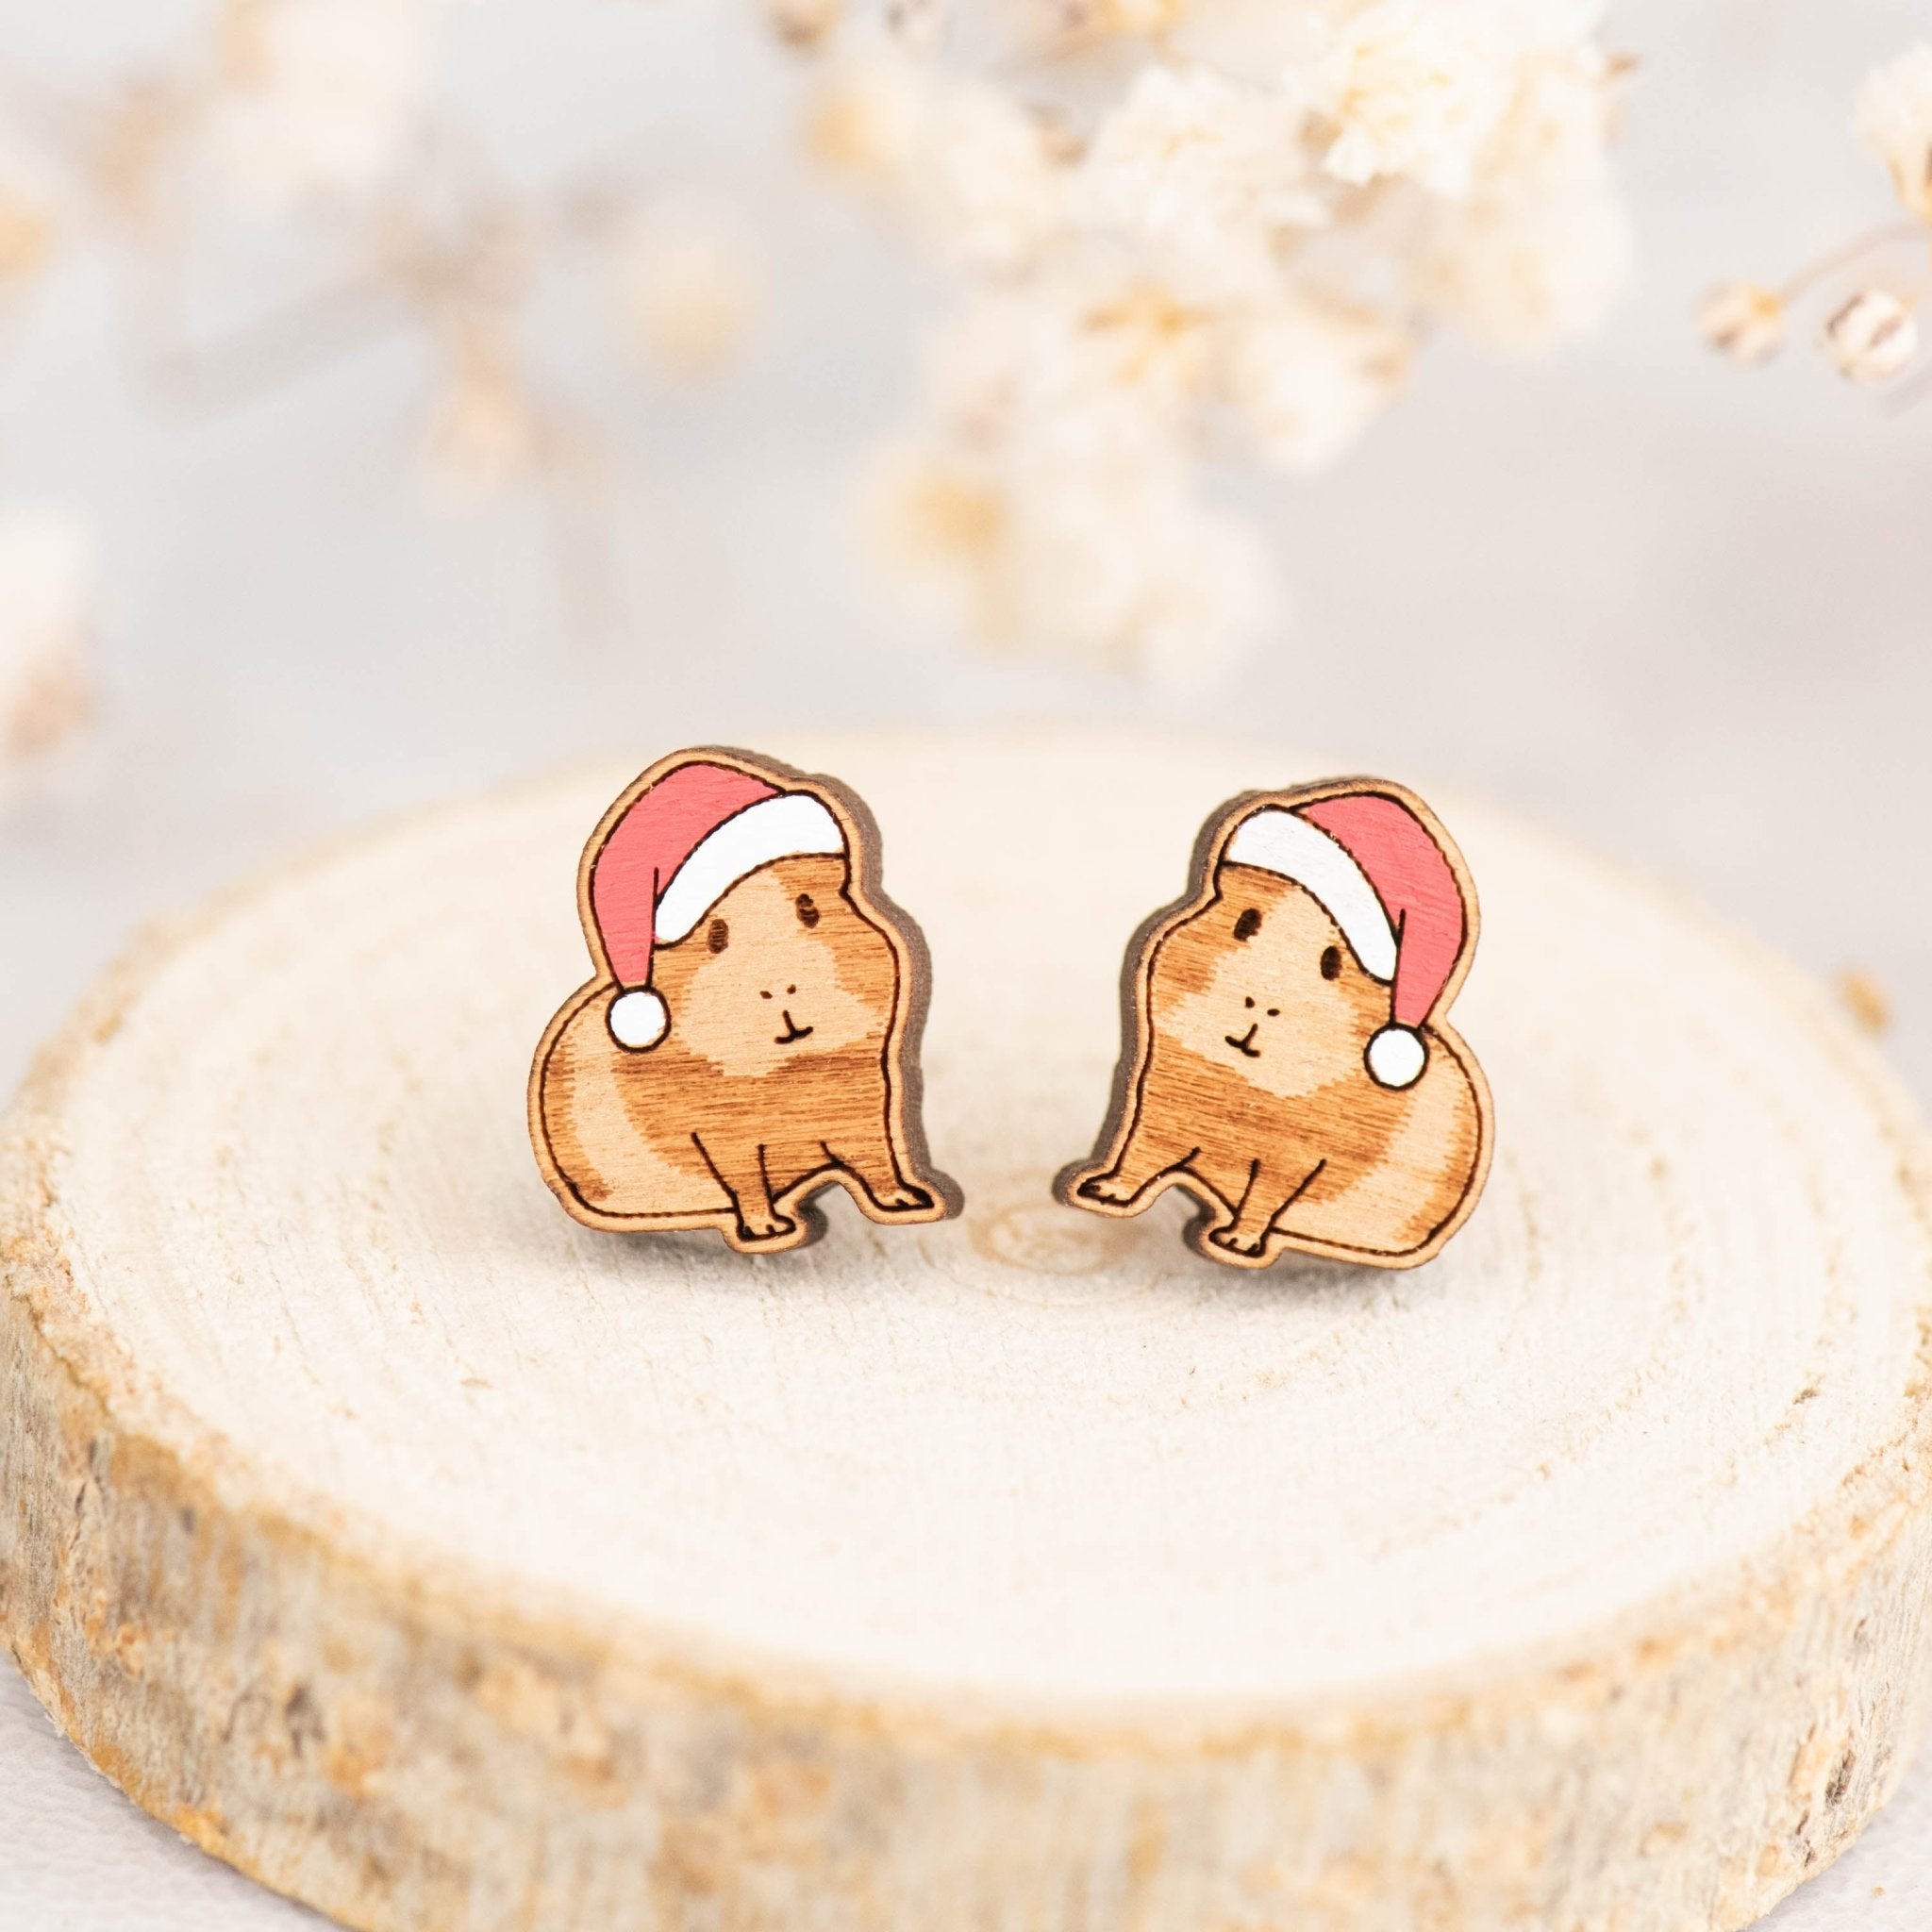 Hand-painted Guinea Pig Earrings in Santa Hat Xmas Collection Wooden Earrings -PEL10159 - Robin Valley Official Store